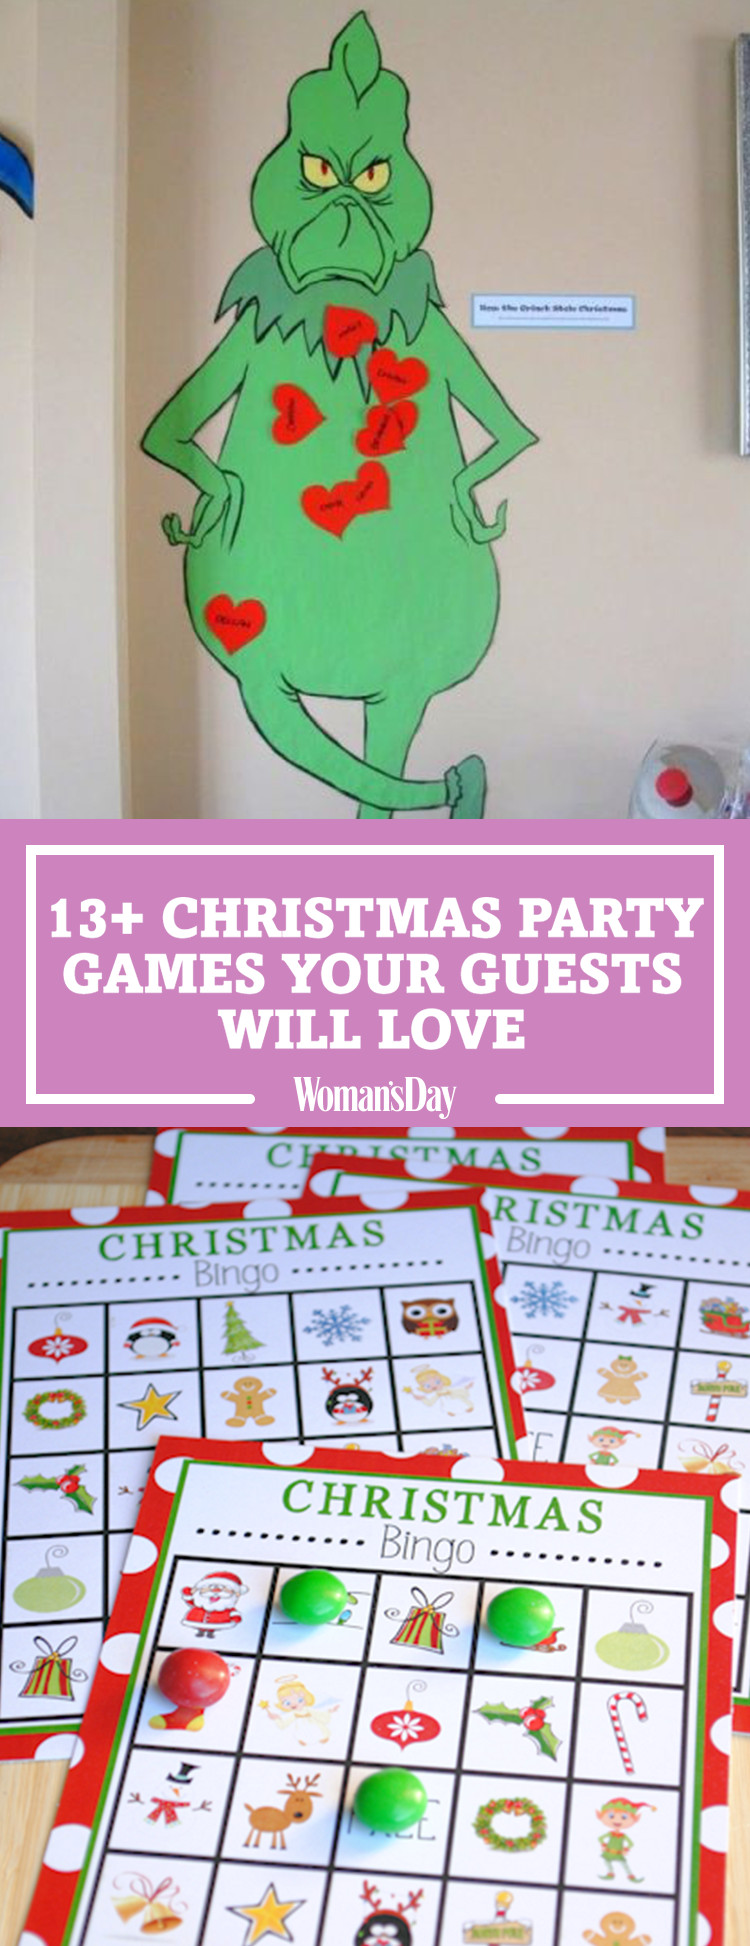 Christmas Party Game Ideas For Kids
 17 Fun Christmas Party Games for Kids DIY Holiday Party